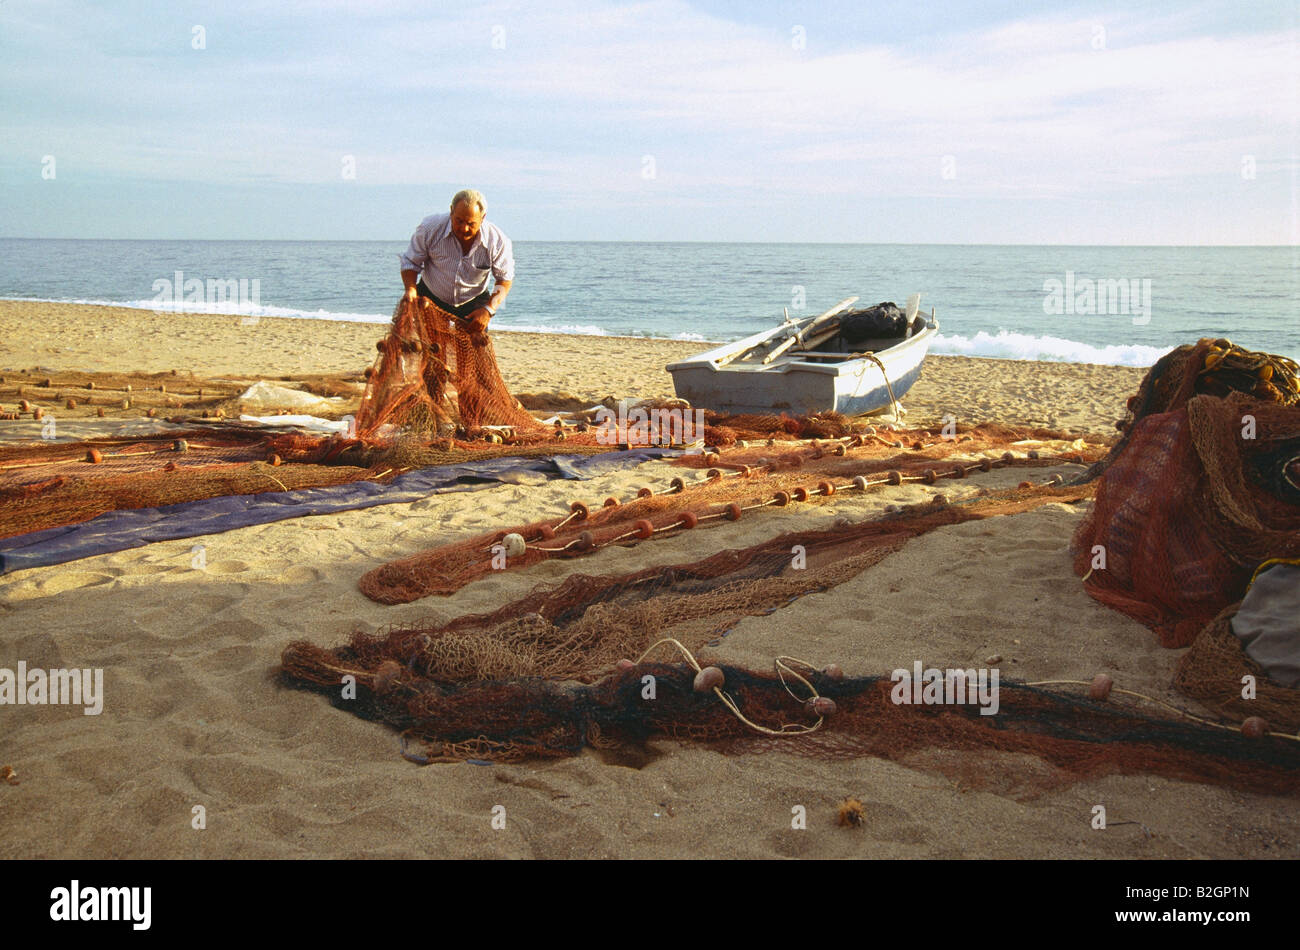 Old fisherman spreading his nets out on the sand. Bolnuevo beach. Murcia province. Spain. Stock Photo